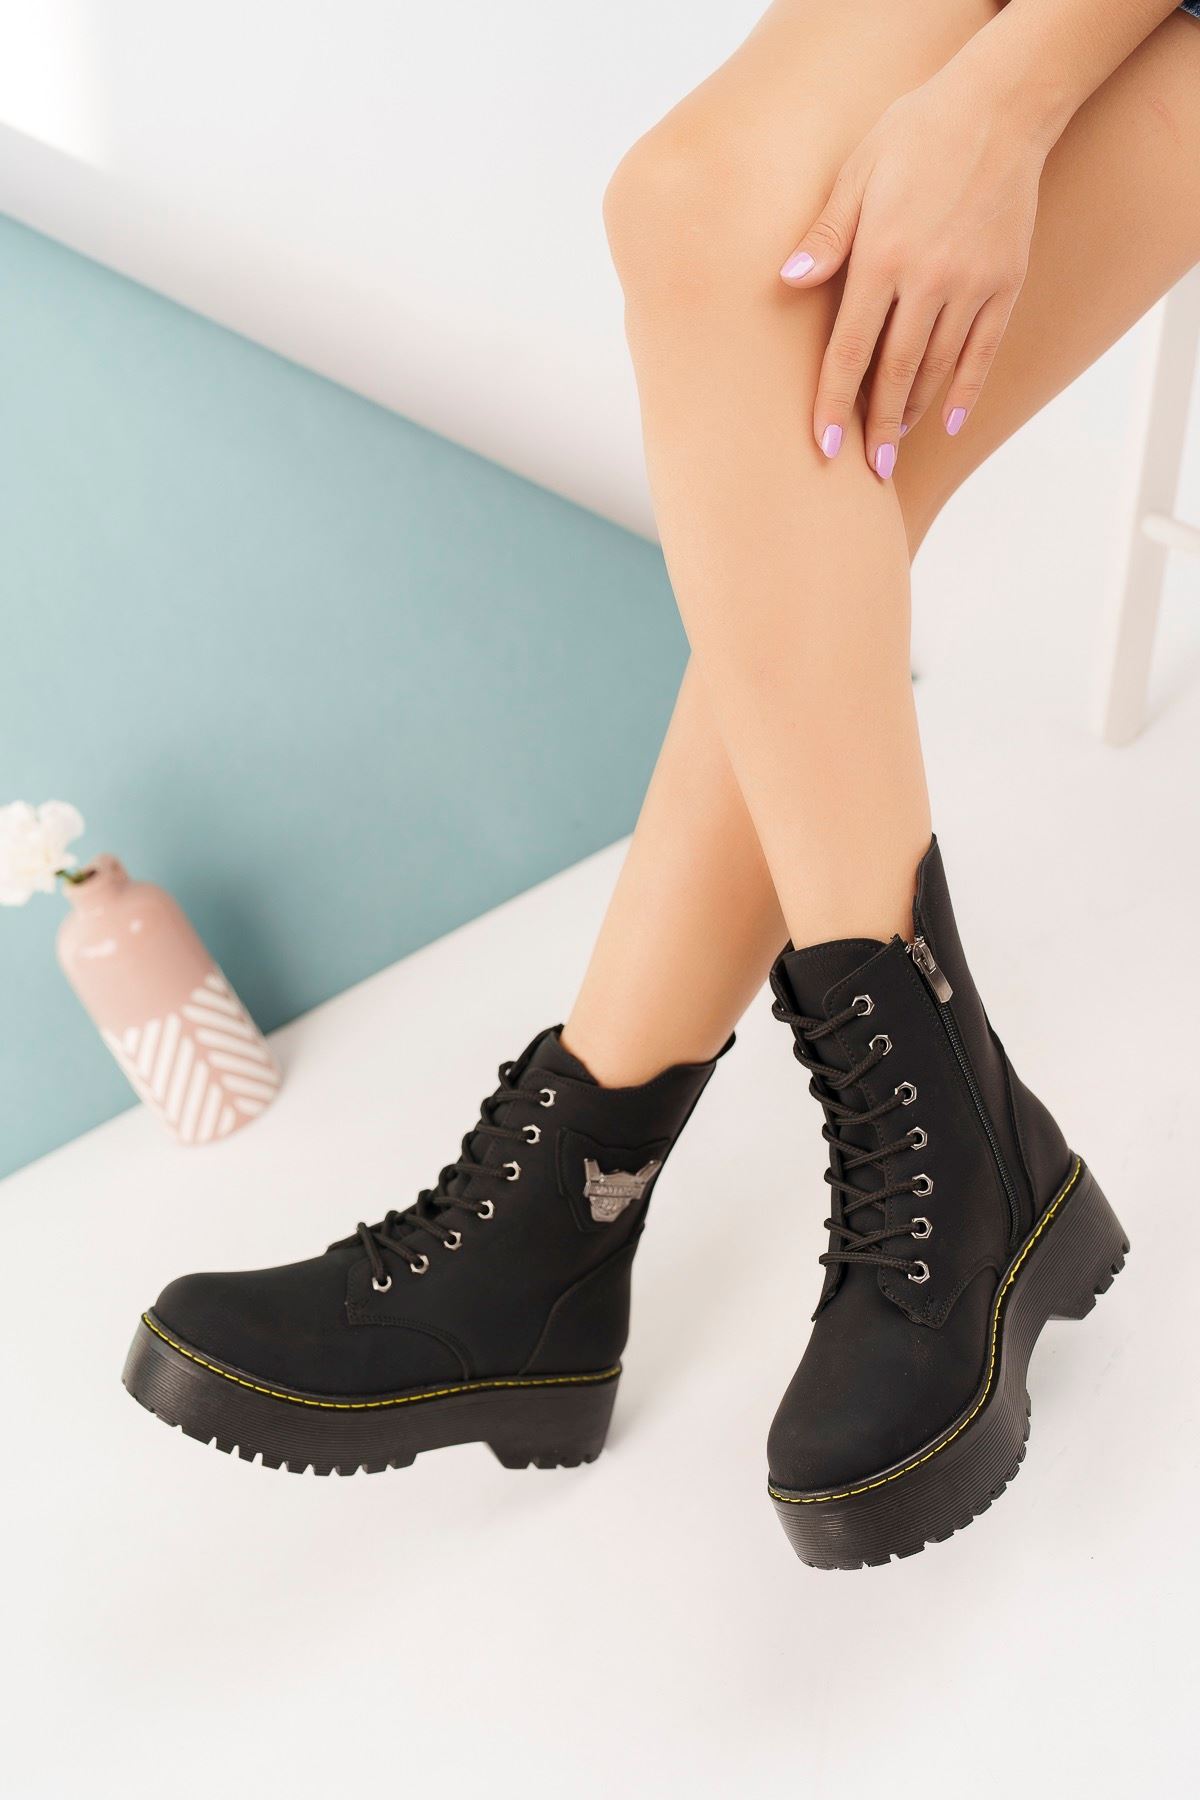 Filled Sole Black Emerald Women's Ankle Boots